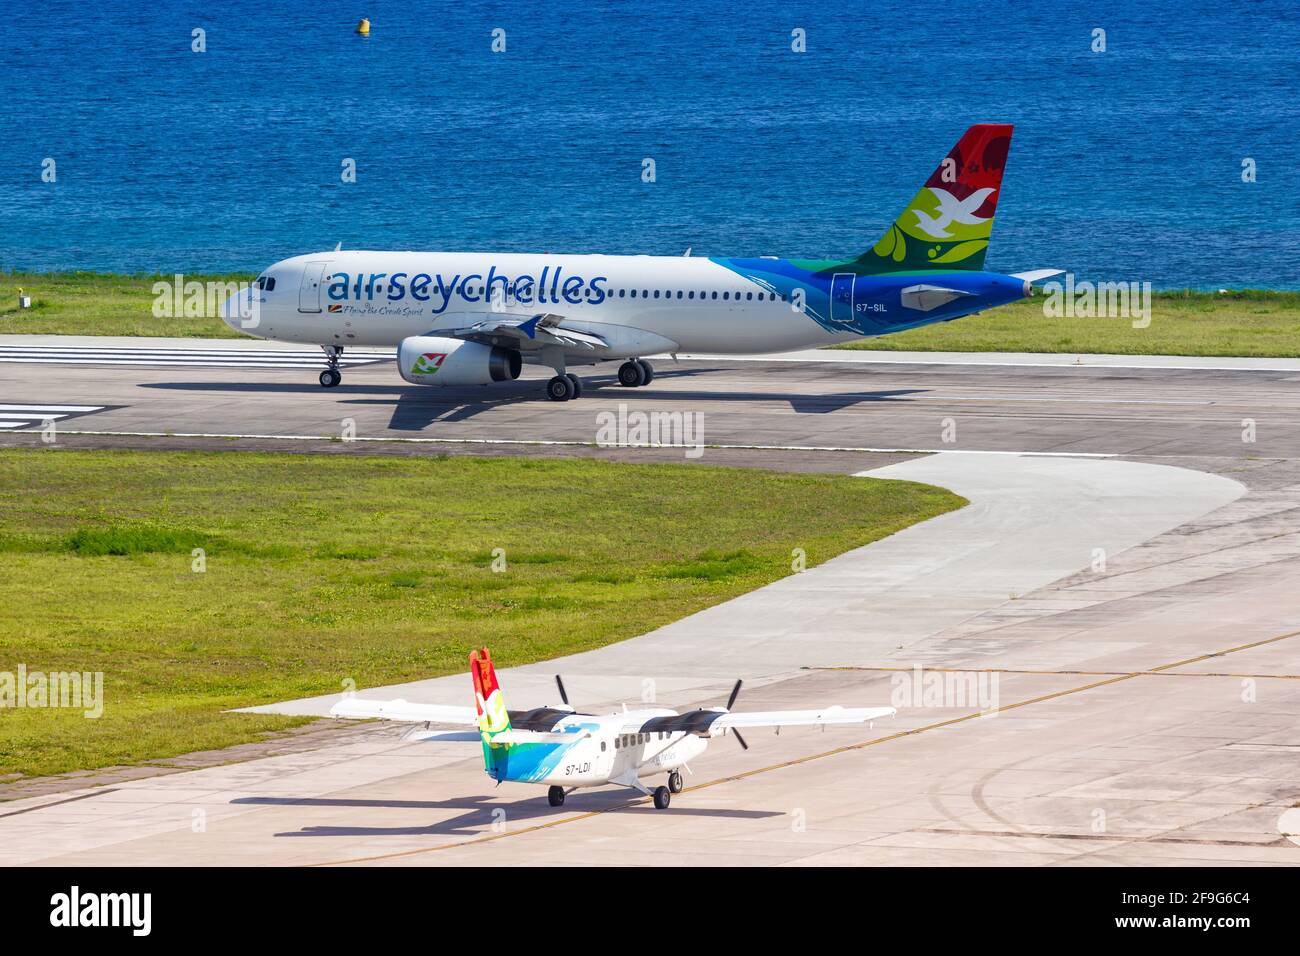 Mahe, Seychelles - November 25, 2017: Air Seychelles airplanes at Seychelles International Airport (SEZ) in the Seychelles. Airbus is a European aircr Stock Photo